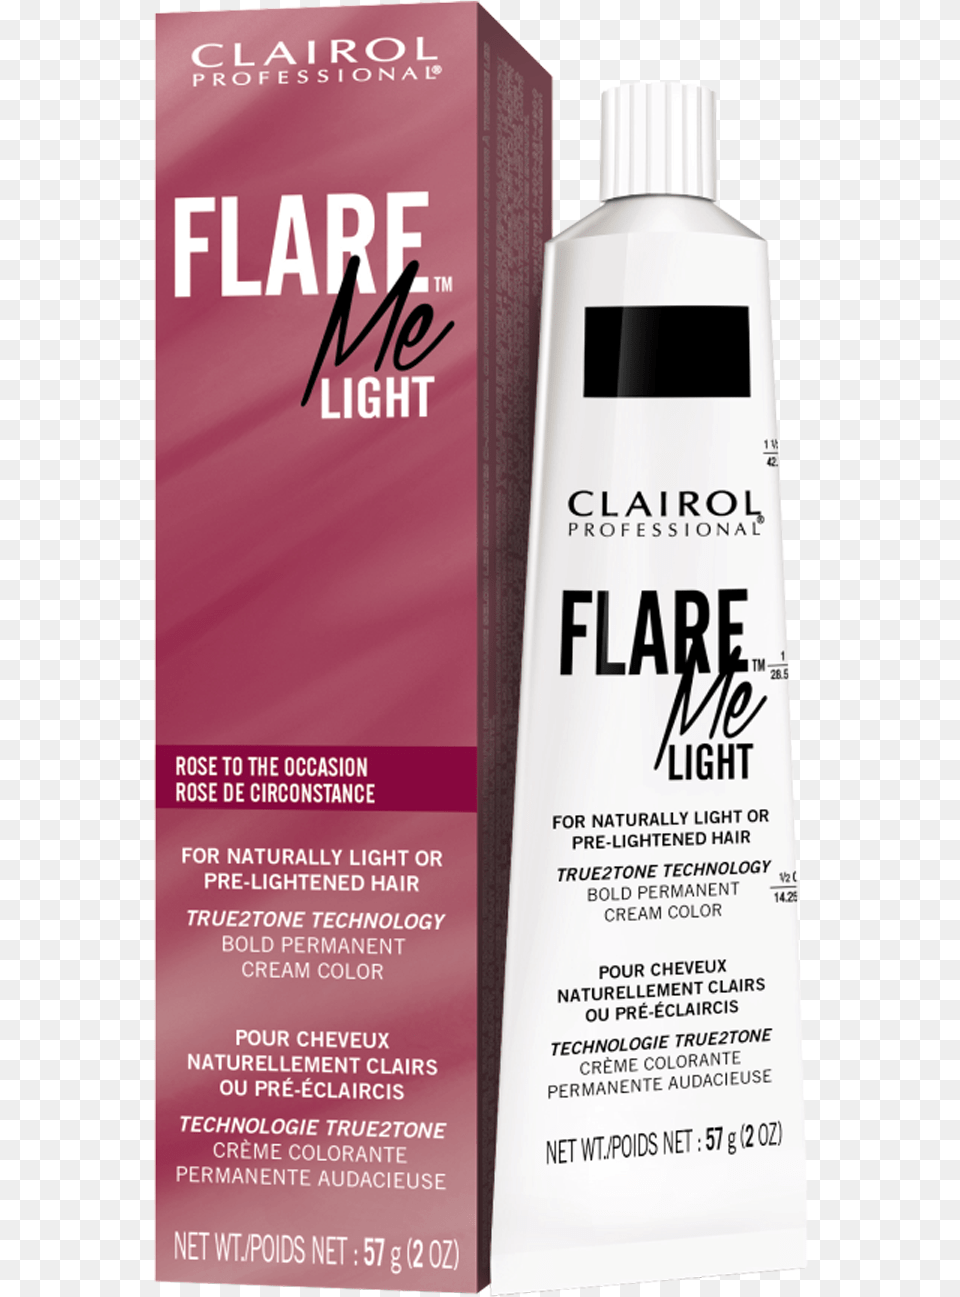 Clairol Professional Flare Me Light Permanent Cream Clairol Flare Me Power To The Purple, Bottle, Cosmetics, Perfume, Advertisement Free Transparent Png